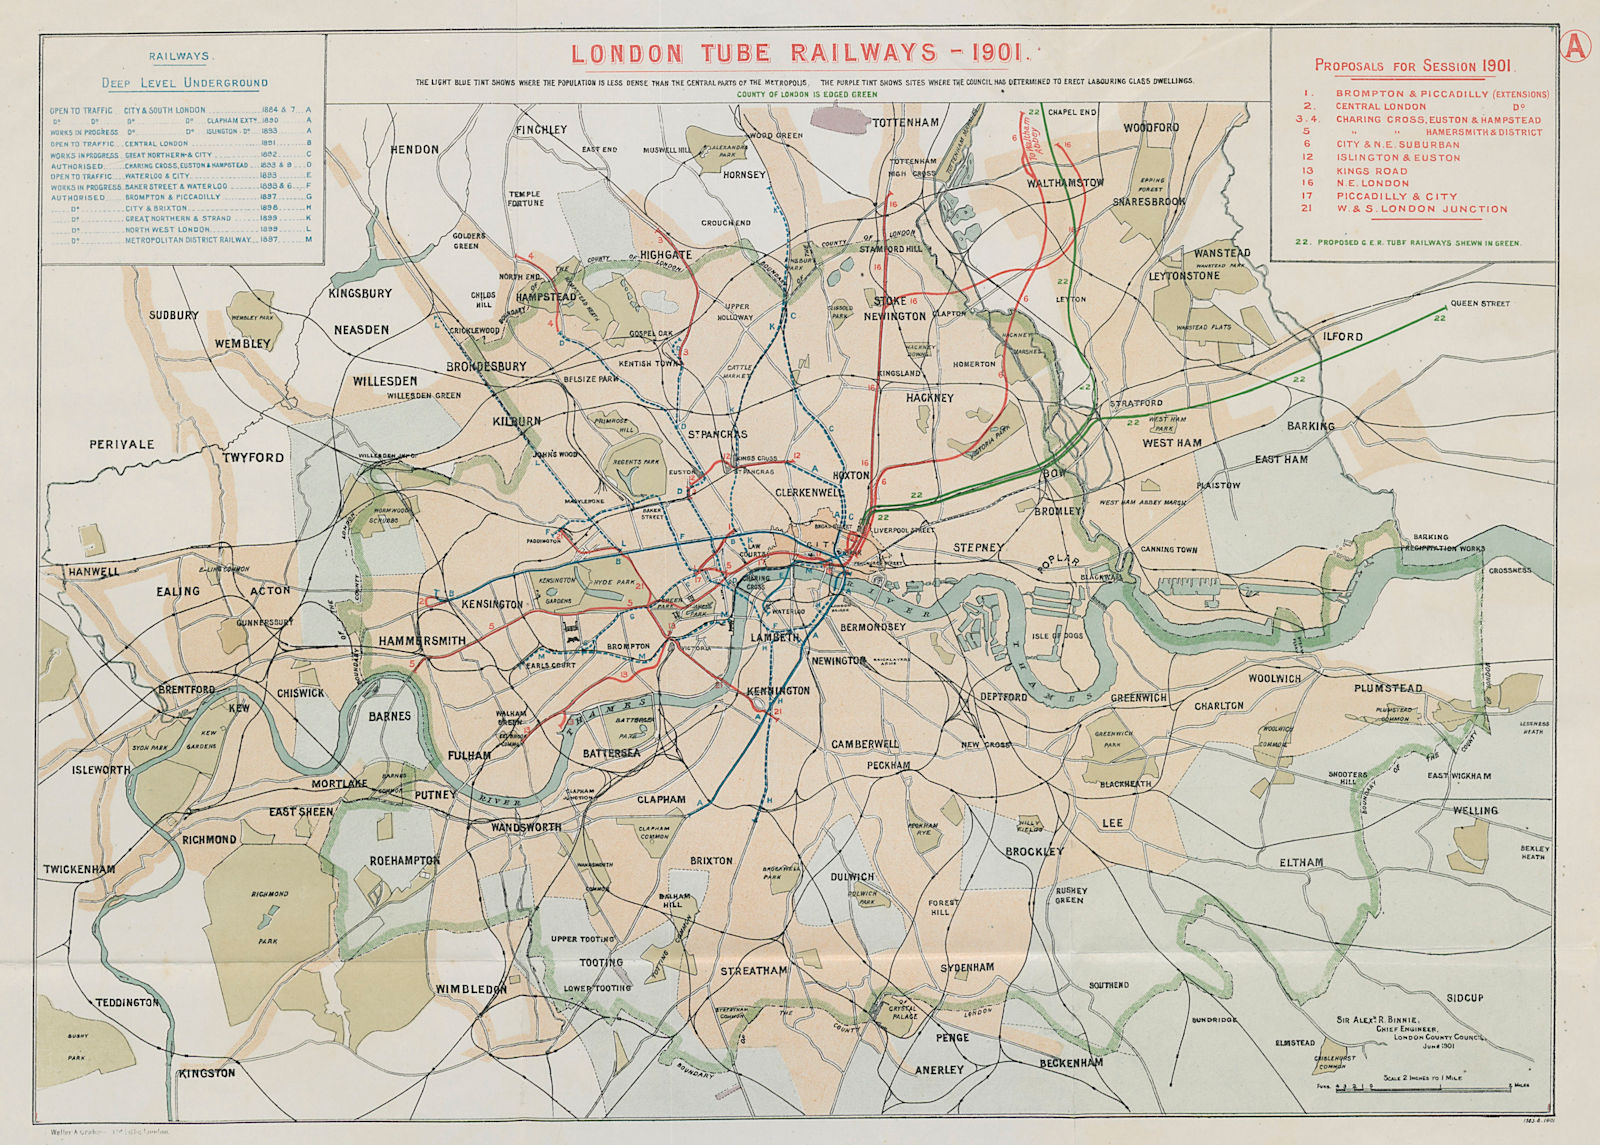 London Tube Railways. 11 proposed new/extended Underground lines HMSO 1901 map